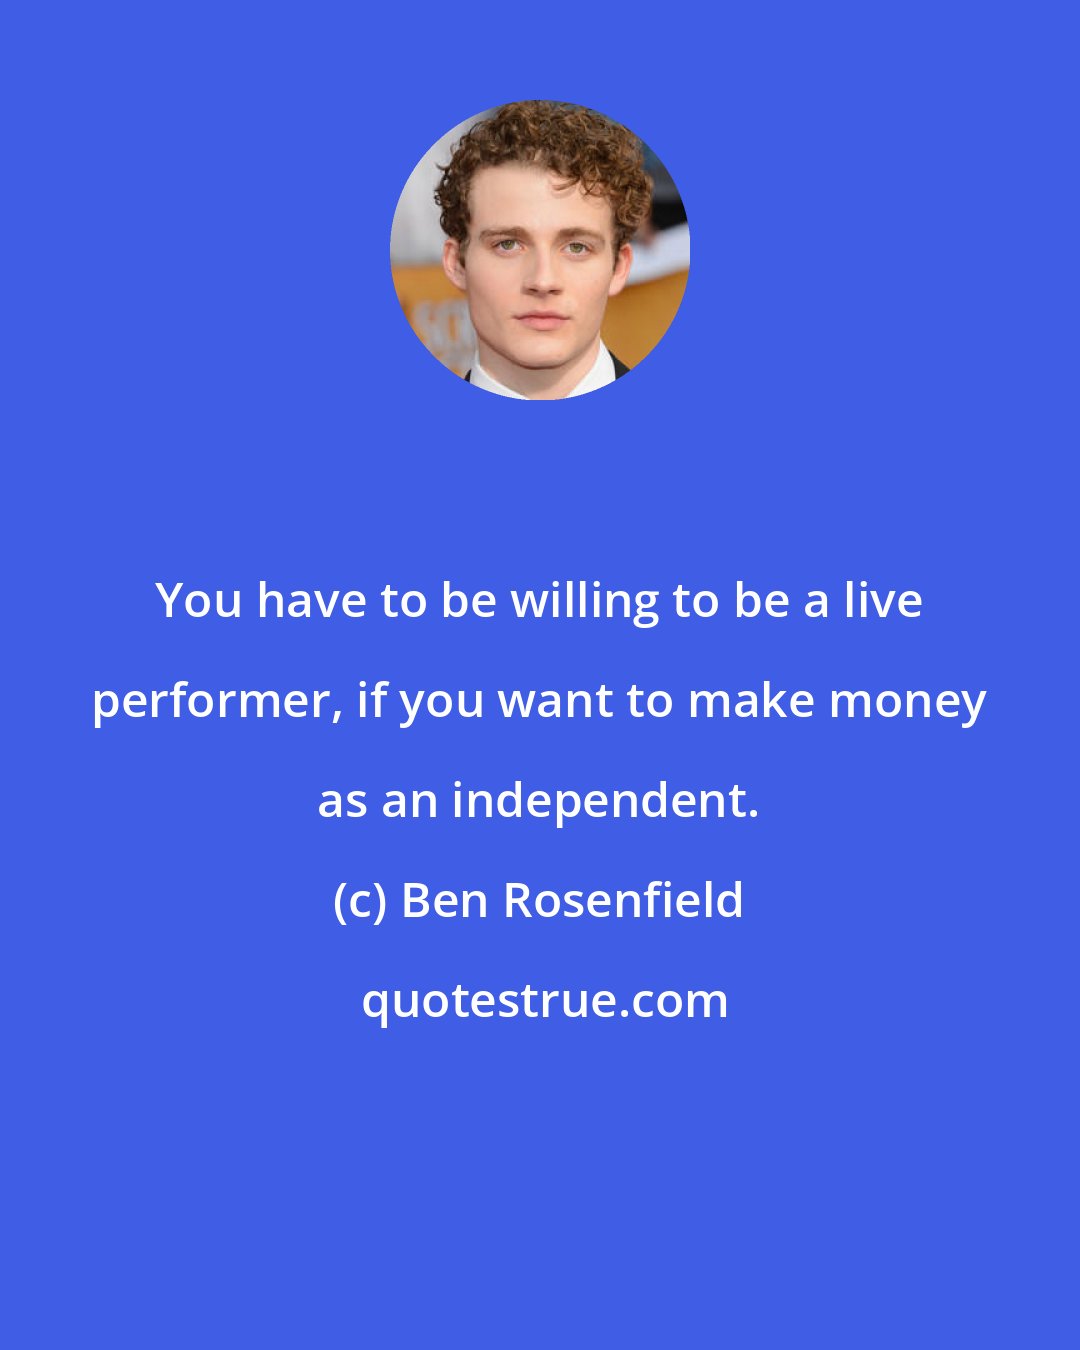 Ben Rosenfield: You have to be willing to be a live performer, if you want to make money as an independent.